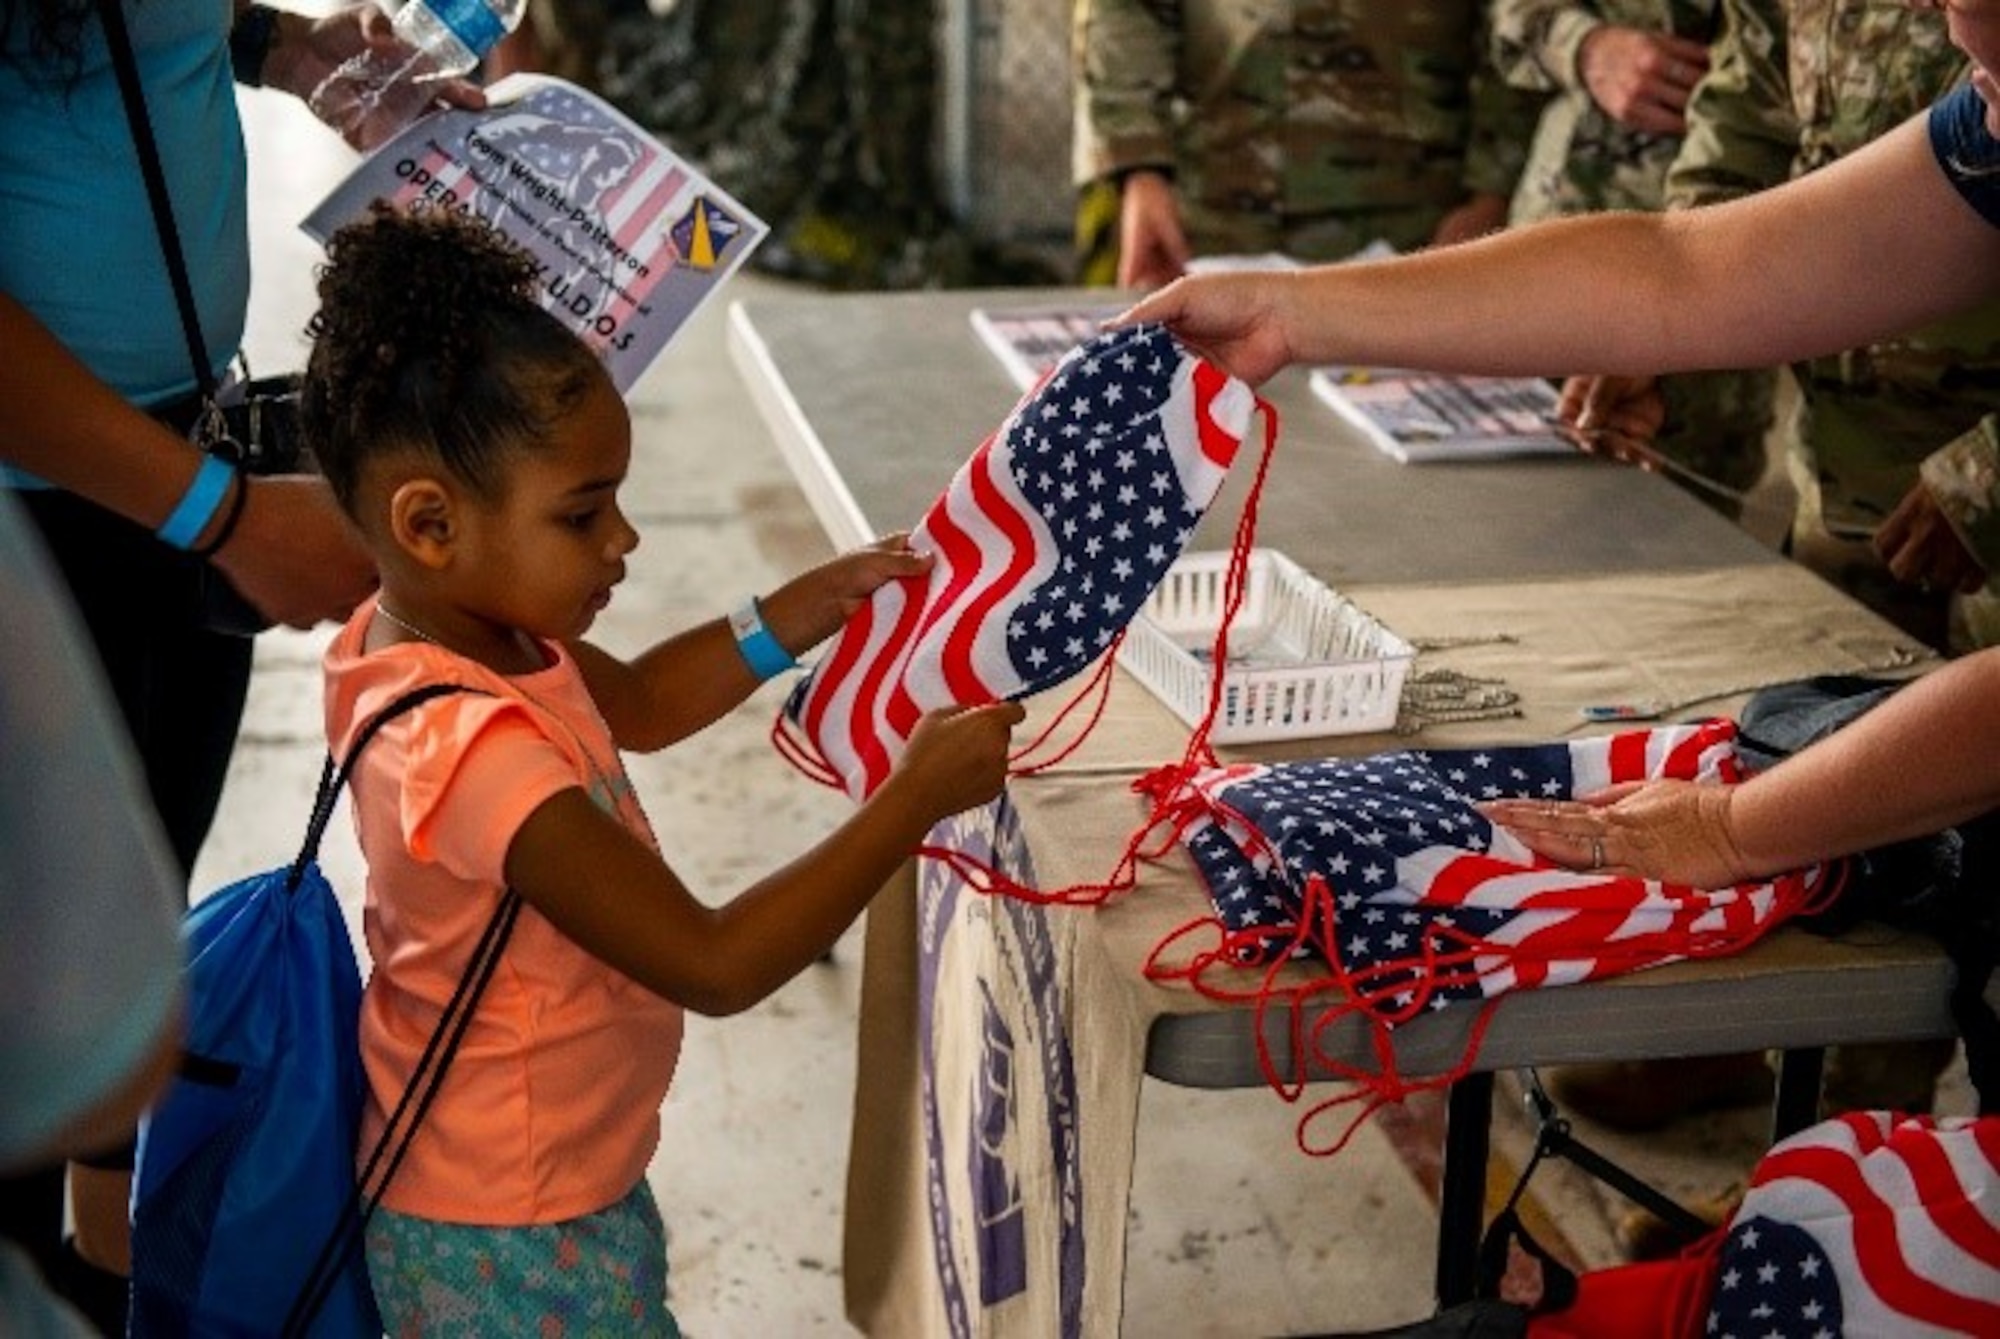 A child is given an American flag bag after participating in Operation KUDOS on July 28 at Wright-Patterson Air Force Base, Ohio. The annual Kids Understanding Deployment Operations event is designed to teach children in military families about deployments through engaging activities. (U.S. Air Force photo by Airman 1st Class James Johnson)